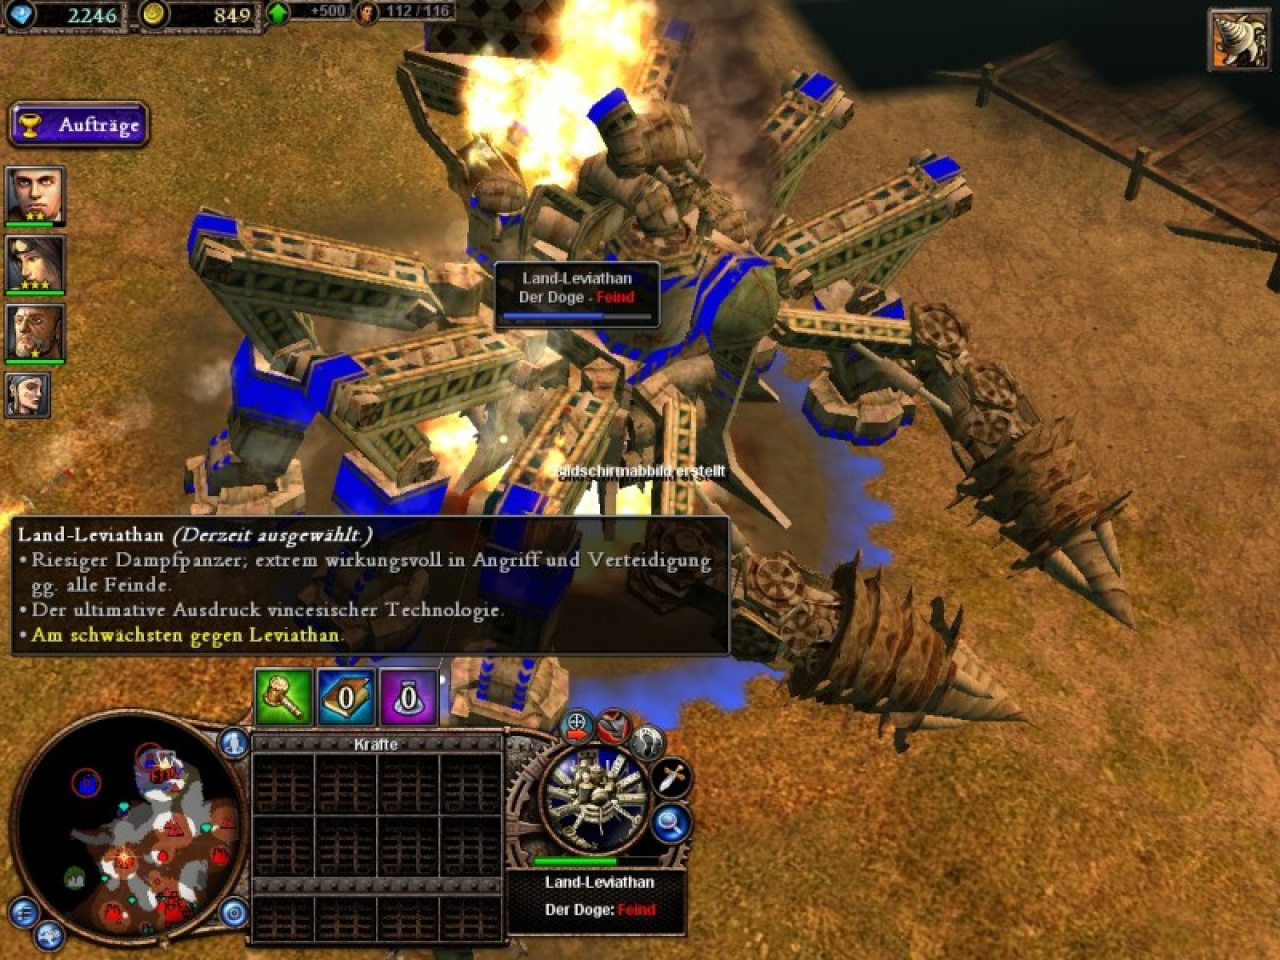 Rise of Nations: Rise of Legends Review - Games Finder